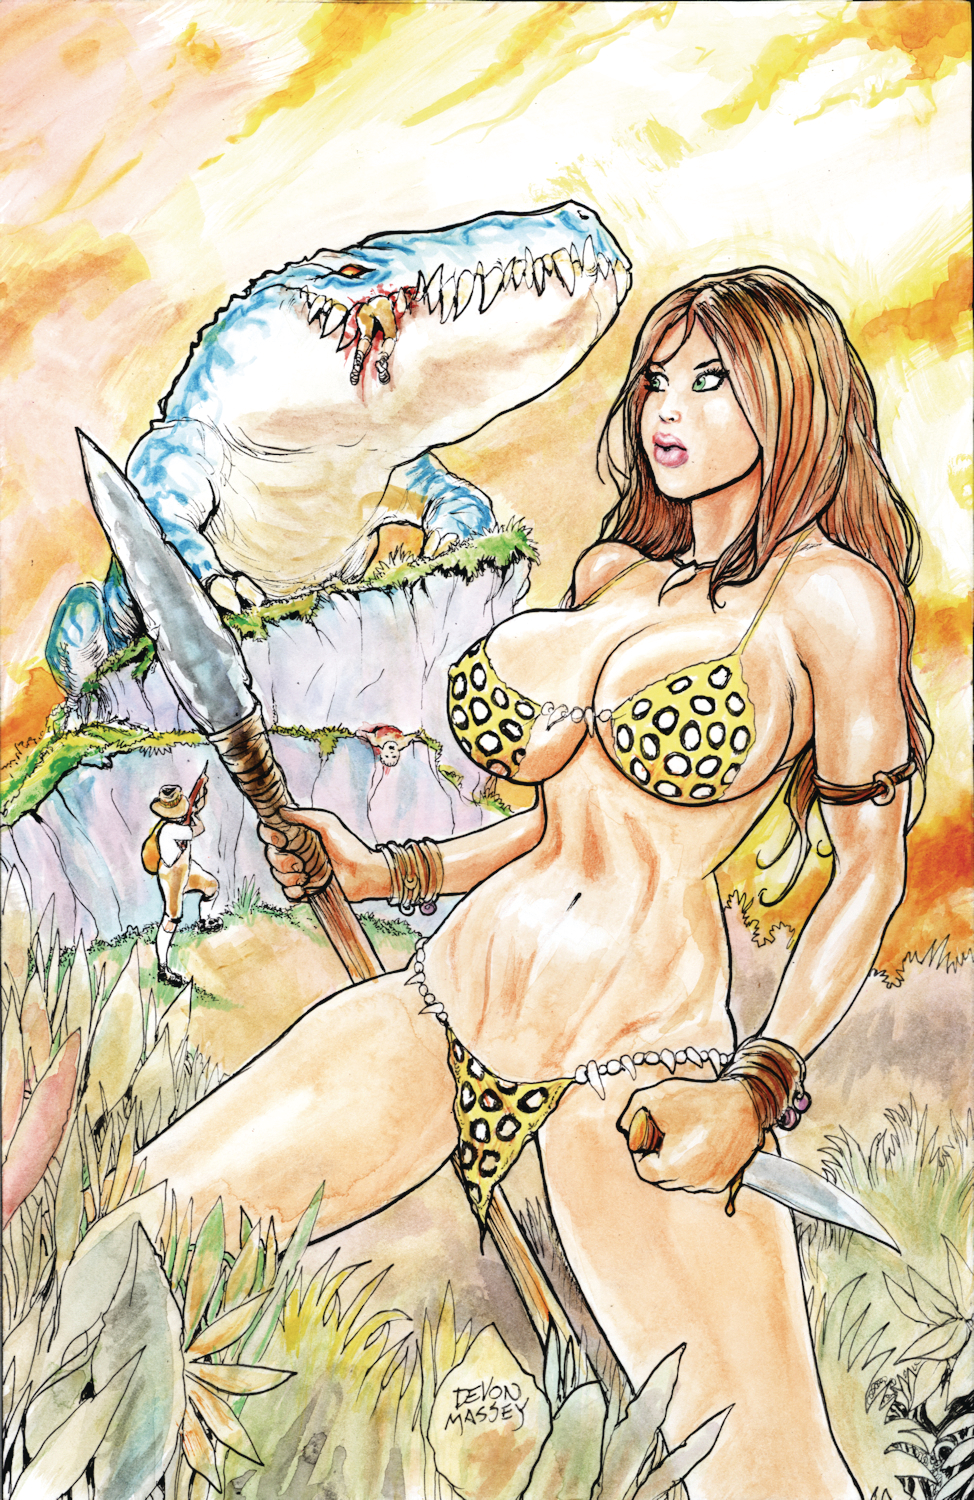 Cavewoman: Rescue Party no. 1 (One Shot) (2019)